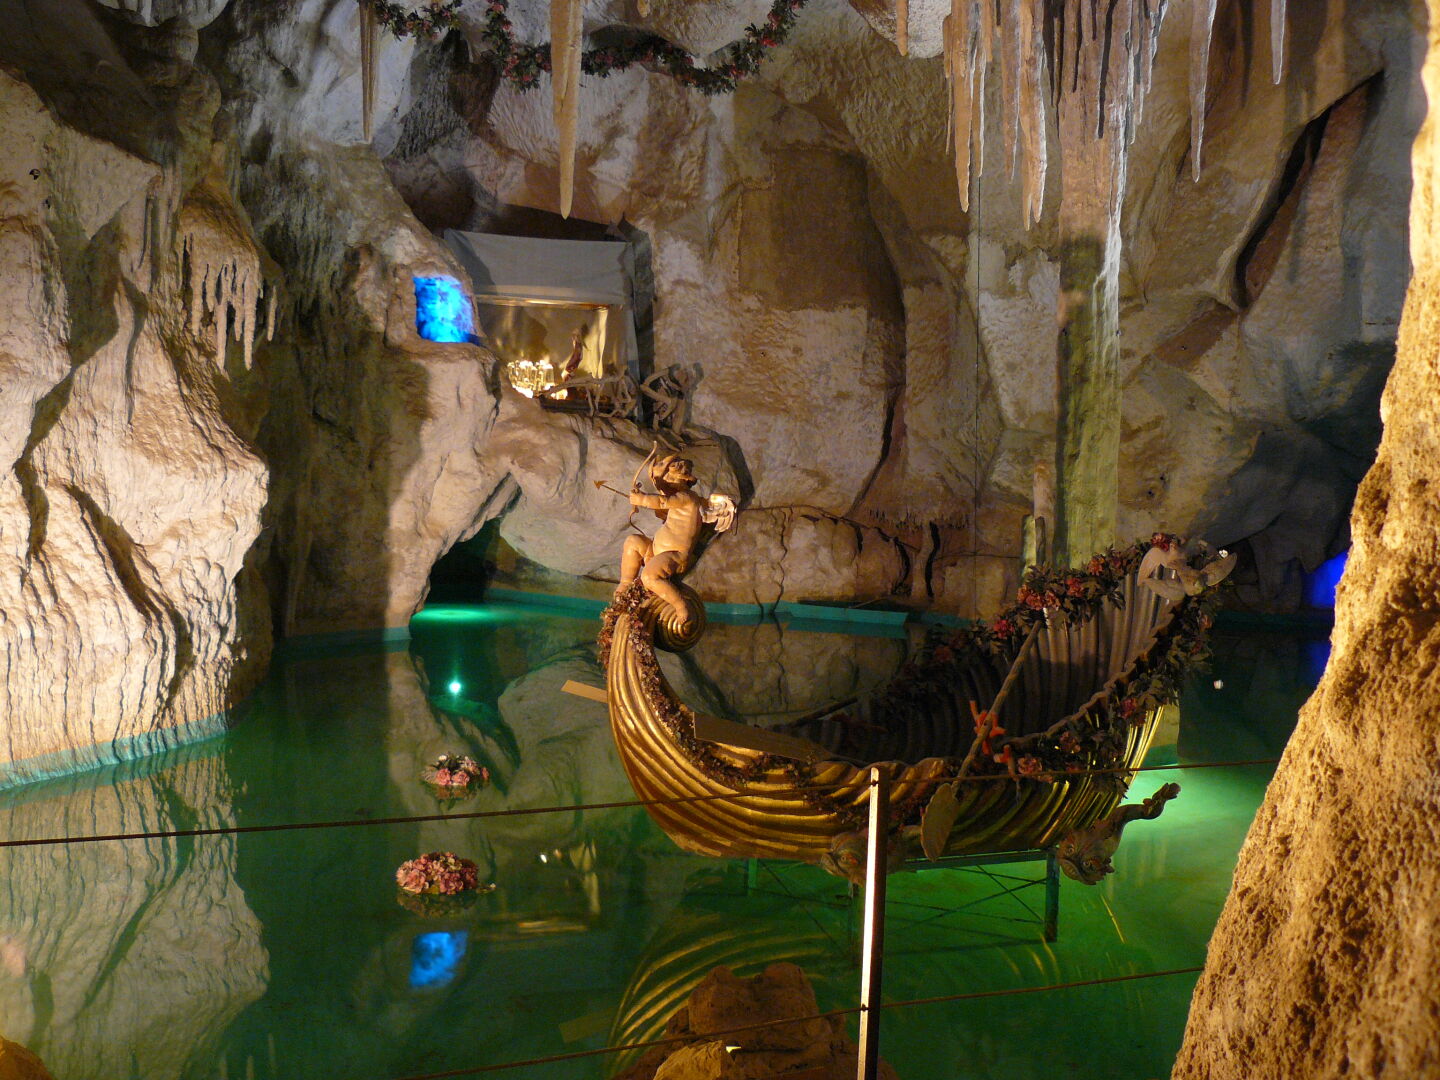 The grotto of Castle Linderhof, an artificial cave that King Ludwig had fitted with stage designs from Richard Wagner operas so he could enjoy his private performances in the appropriate atmosphere.